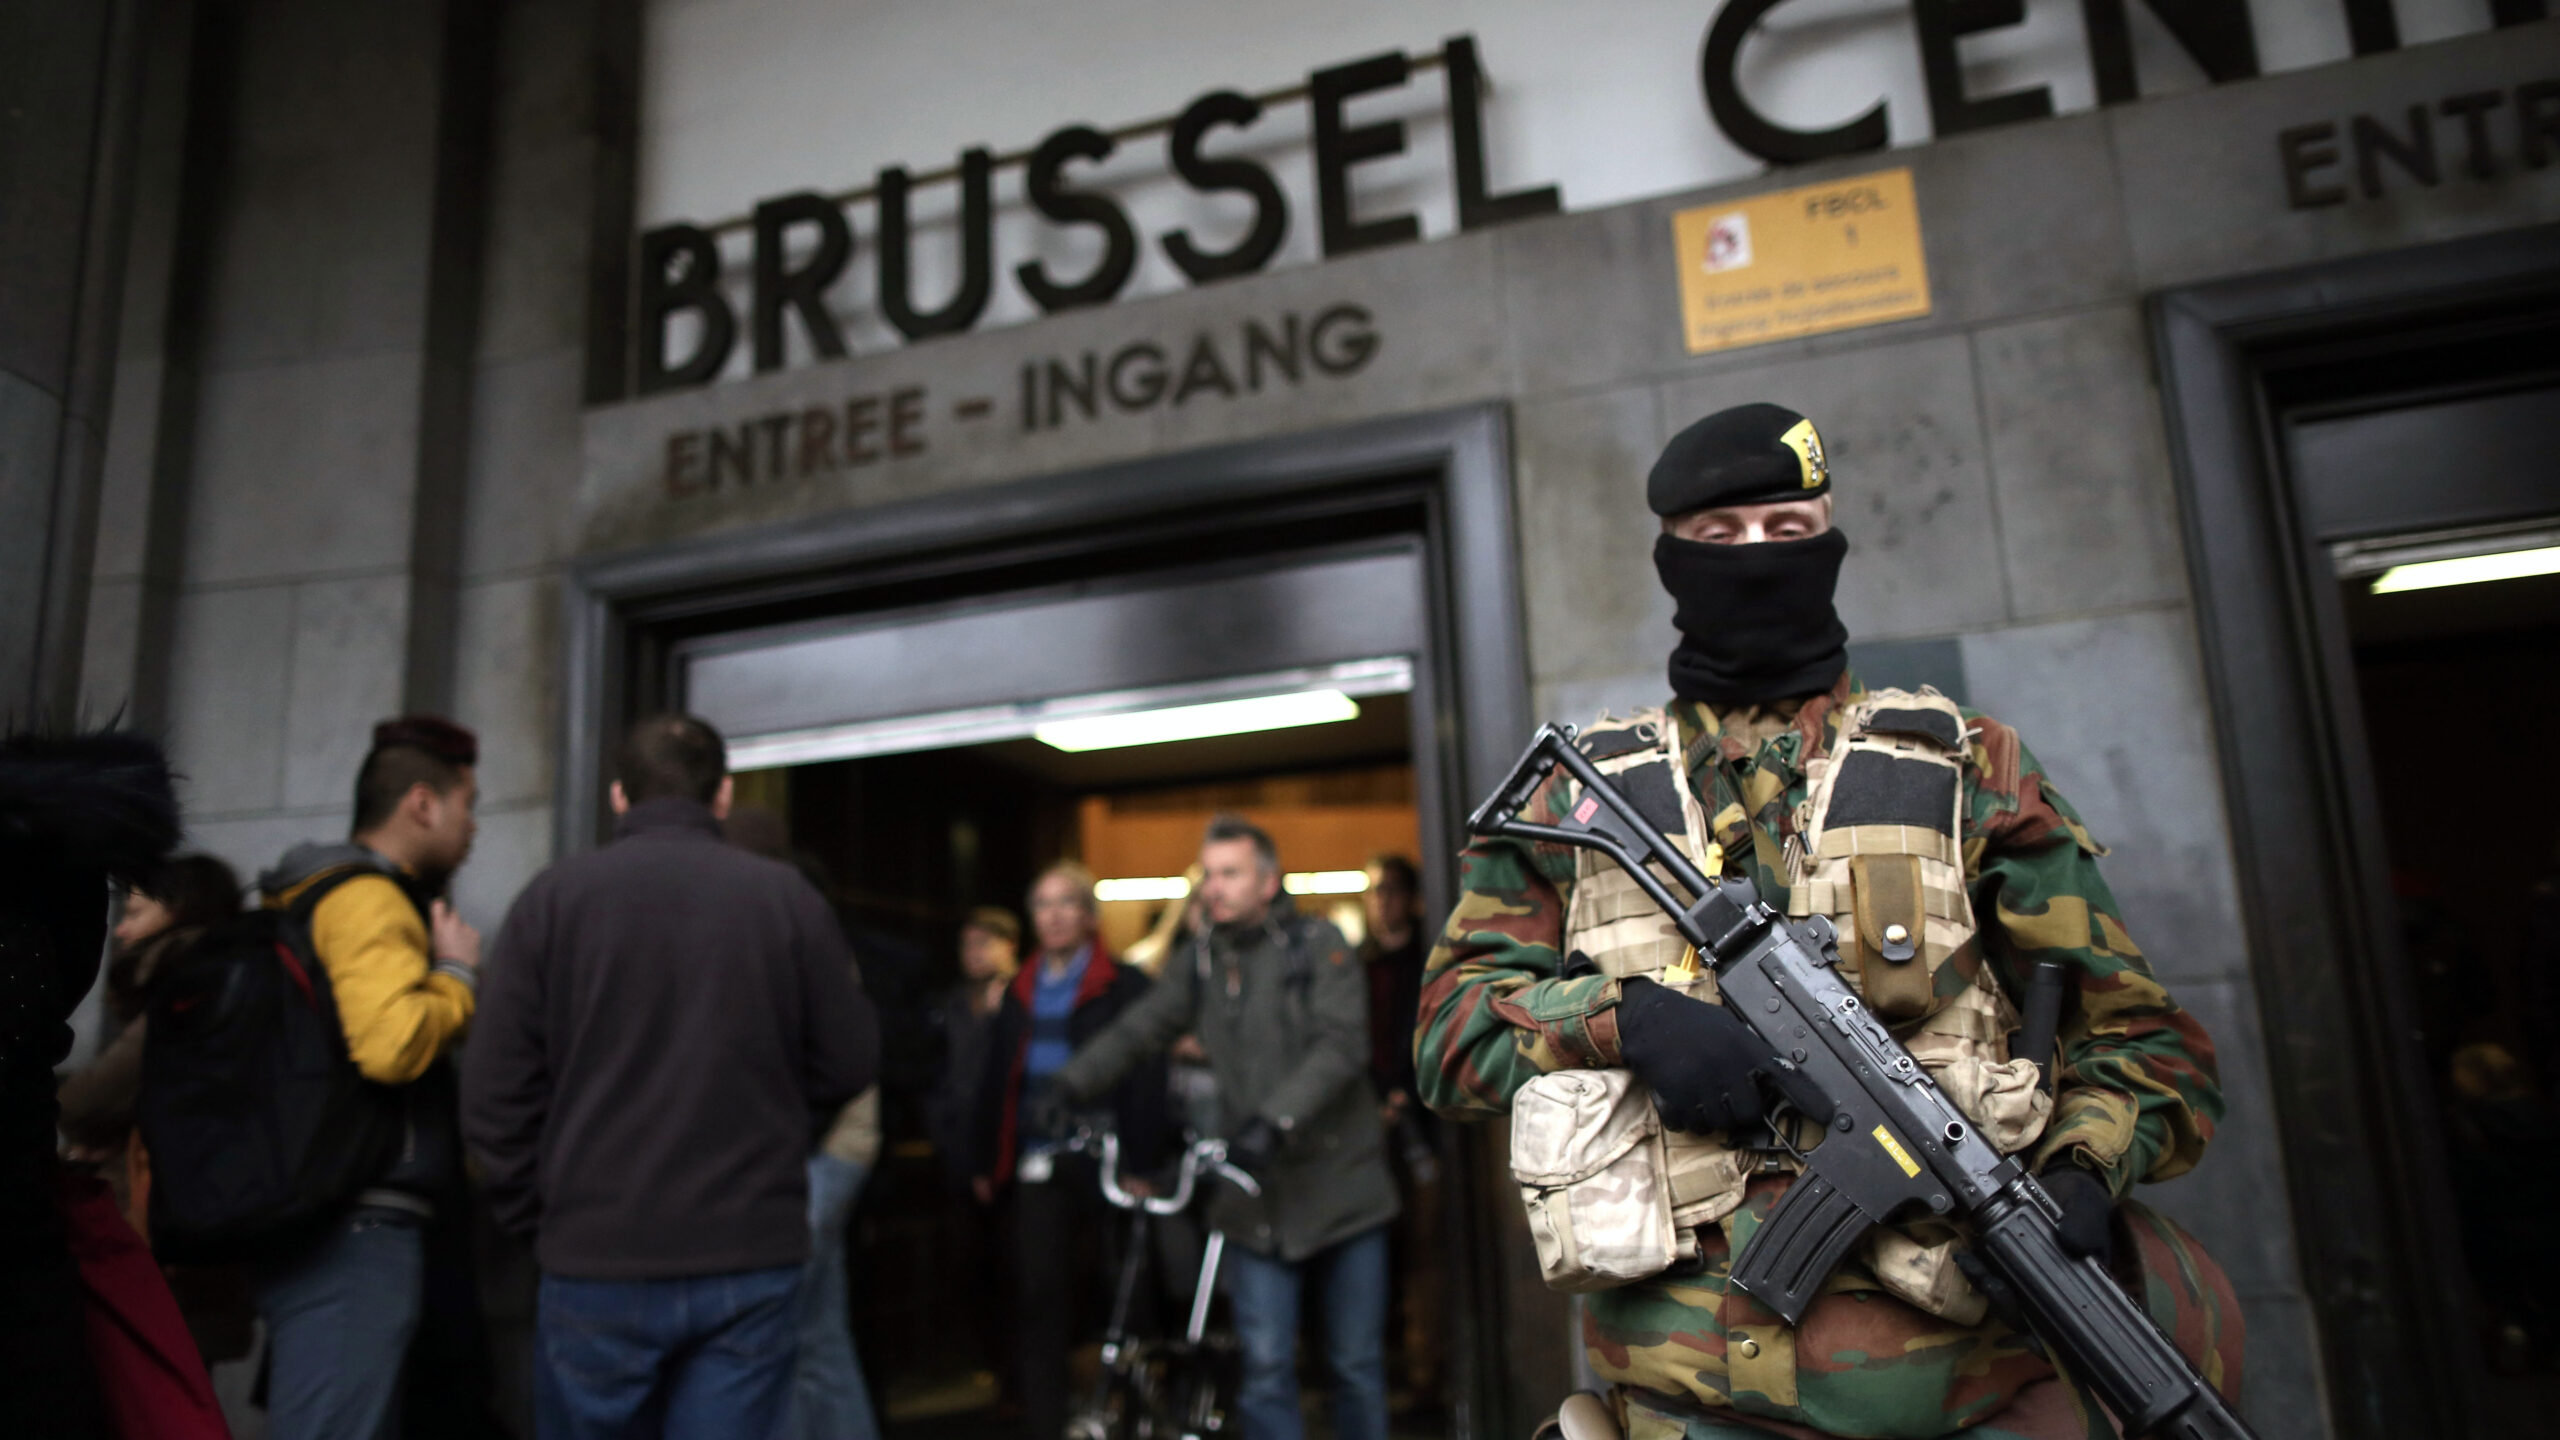 U.S. Officials Issue ‘Security Alert’ Over Possible Attack In Major European City